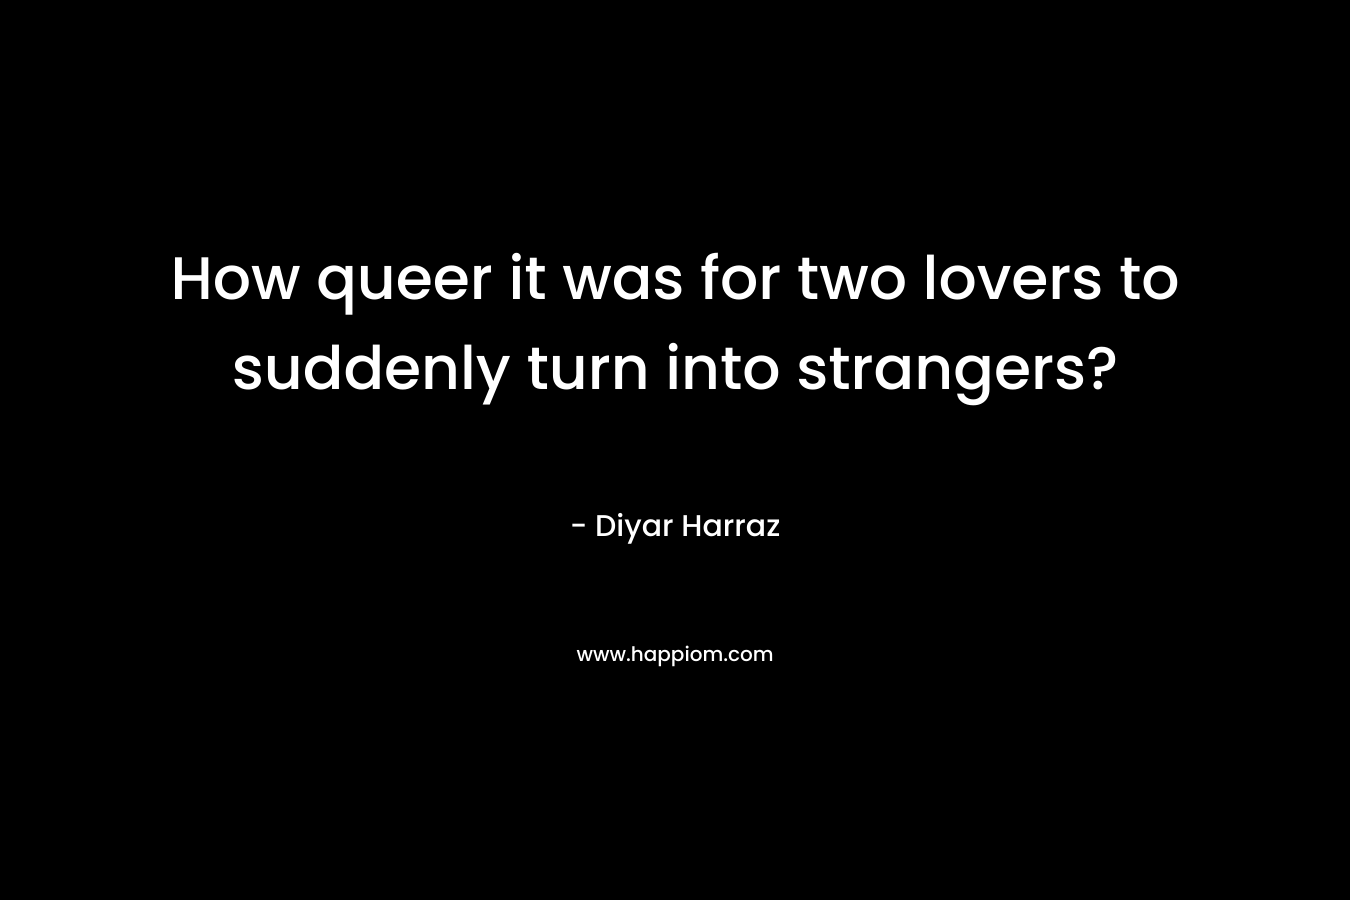 How queer it was for two lovers to suddenly turn into strangers? – Diyar Harraz